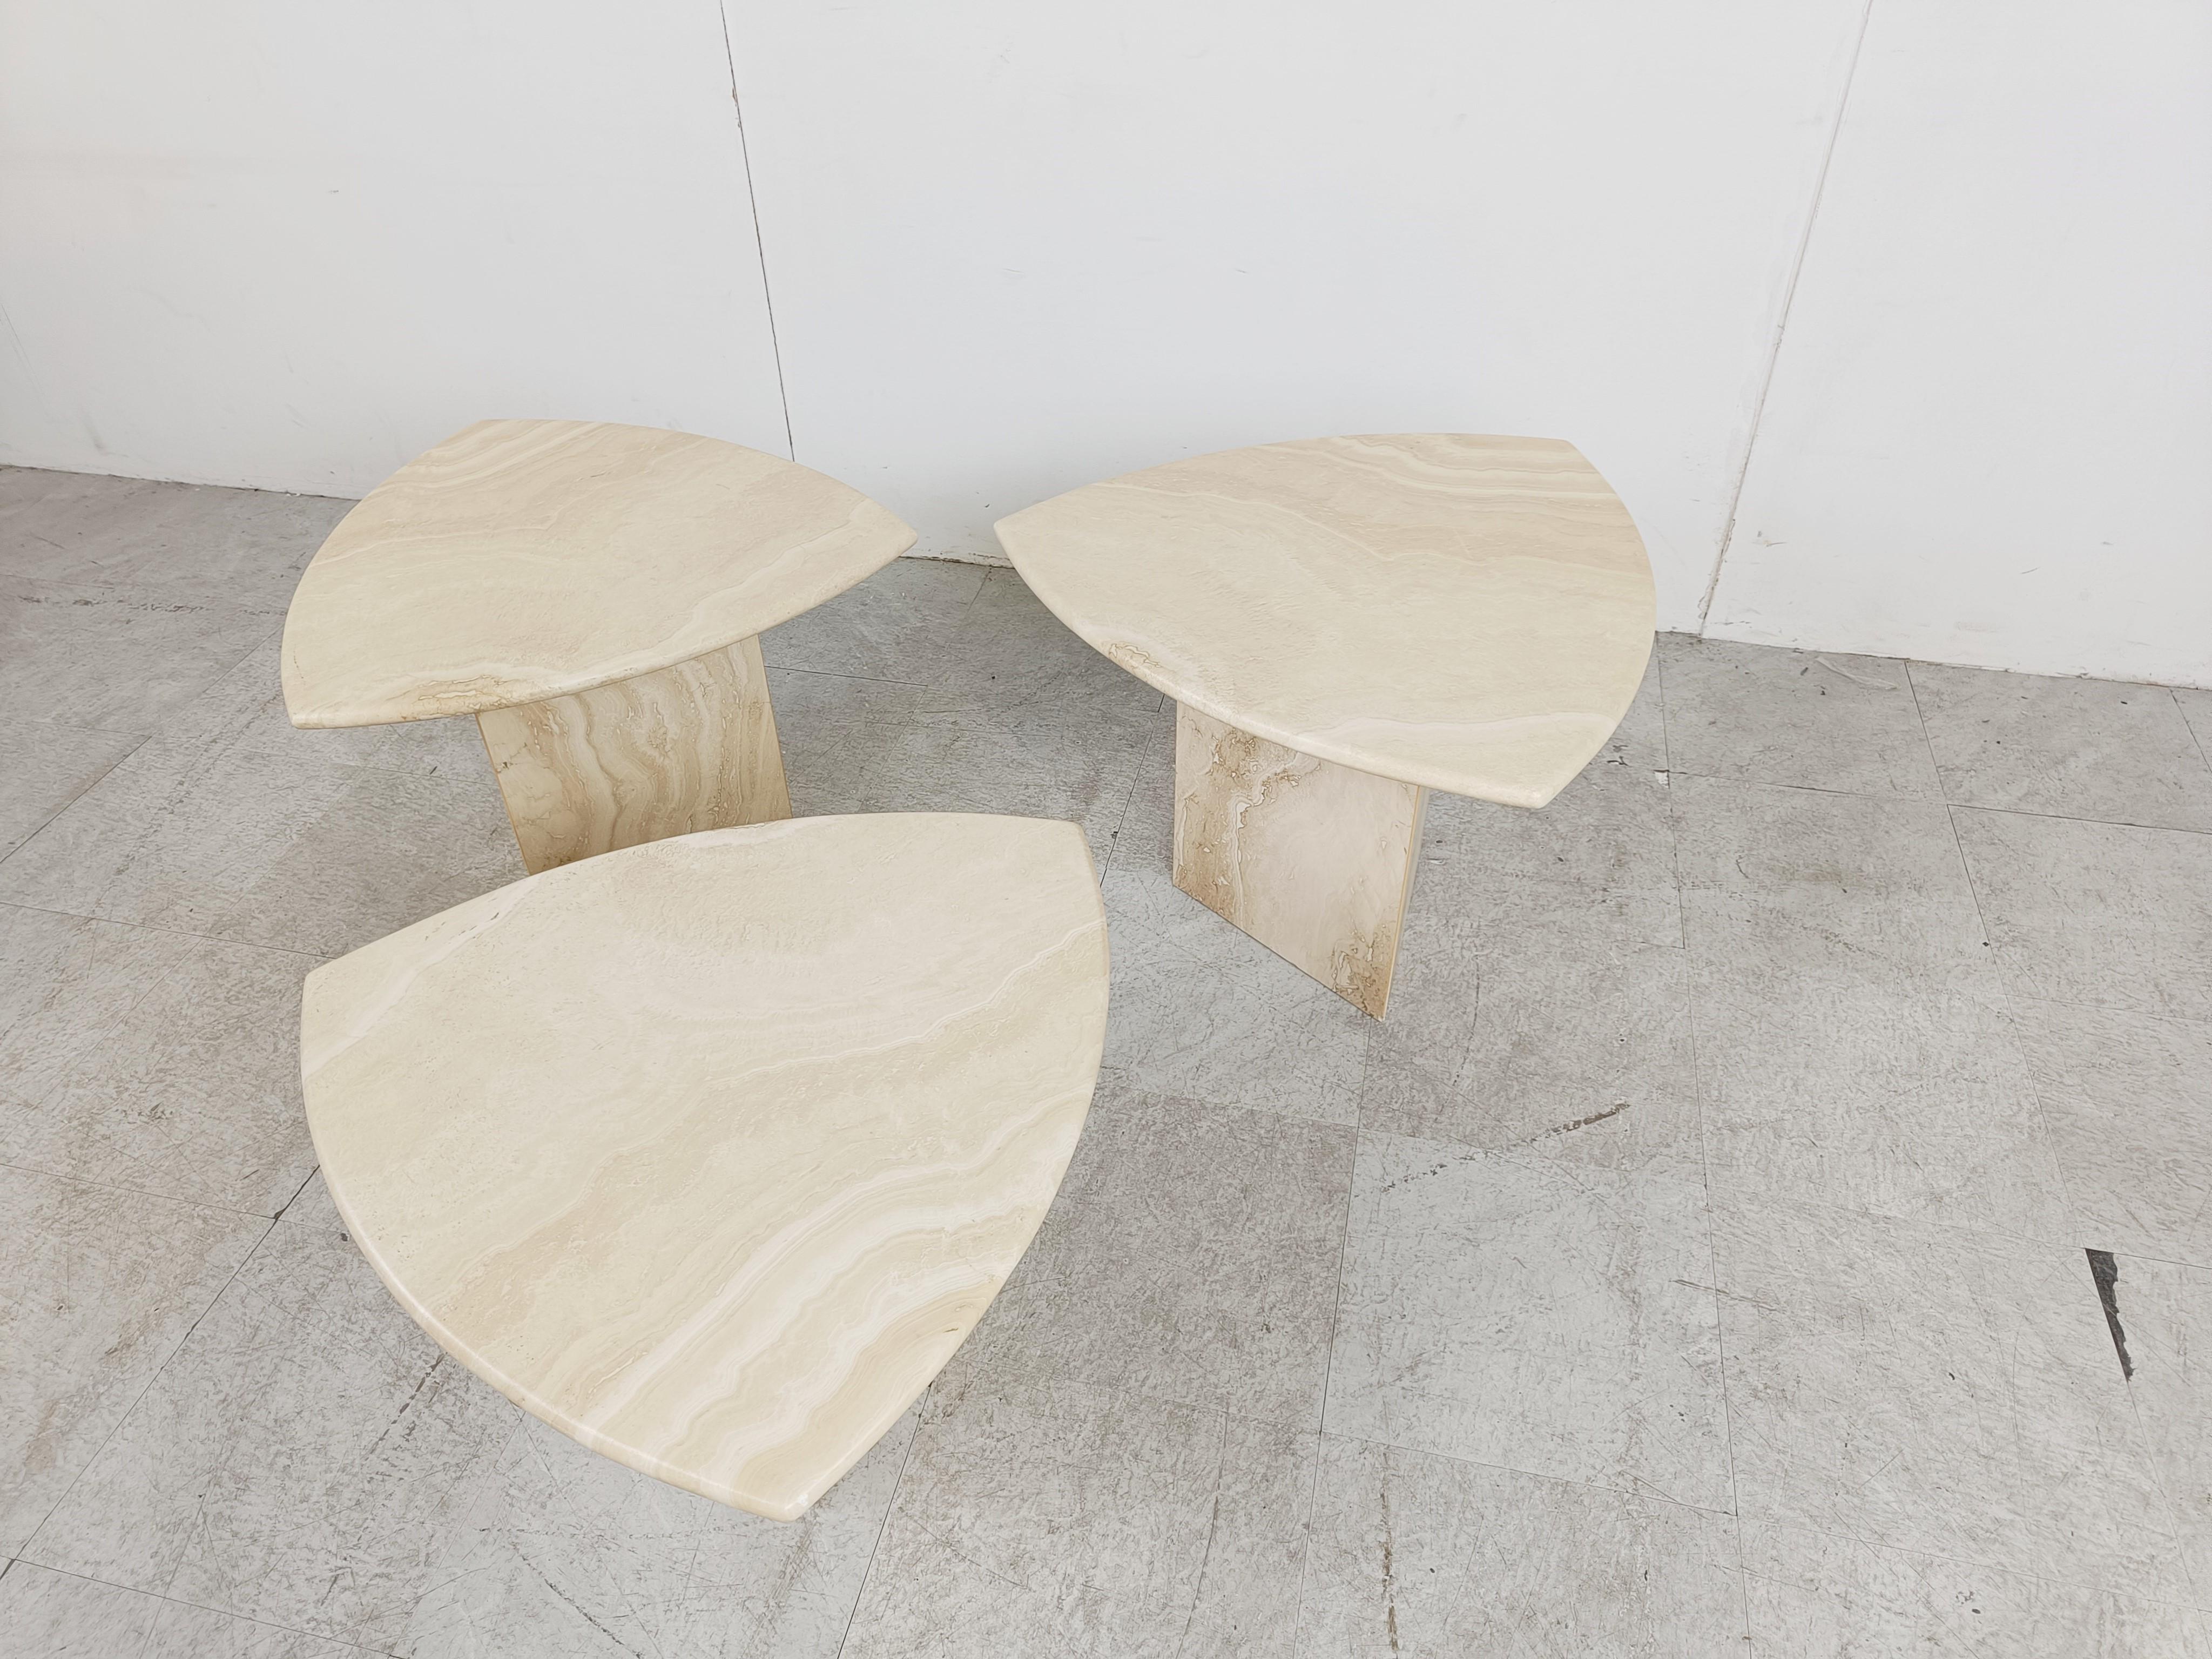 Set of 1970s italian triangular travertine stone nesting tables or side tables.

The tables can be set up in different compositions. Timeless items.

Beautiful colour.

Very good condition

1970s - italy

Dimensions:
Largest table: 60*60*43 cm